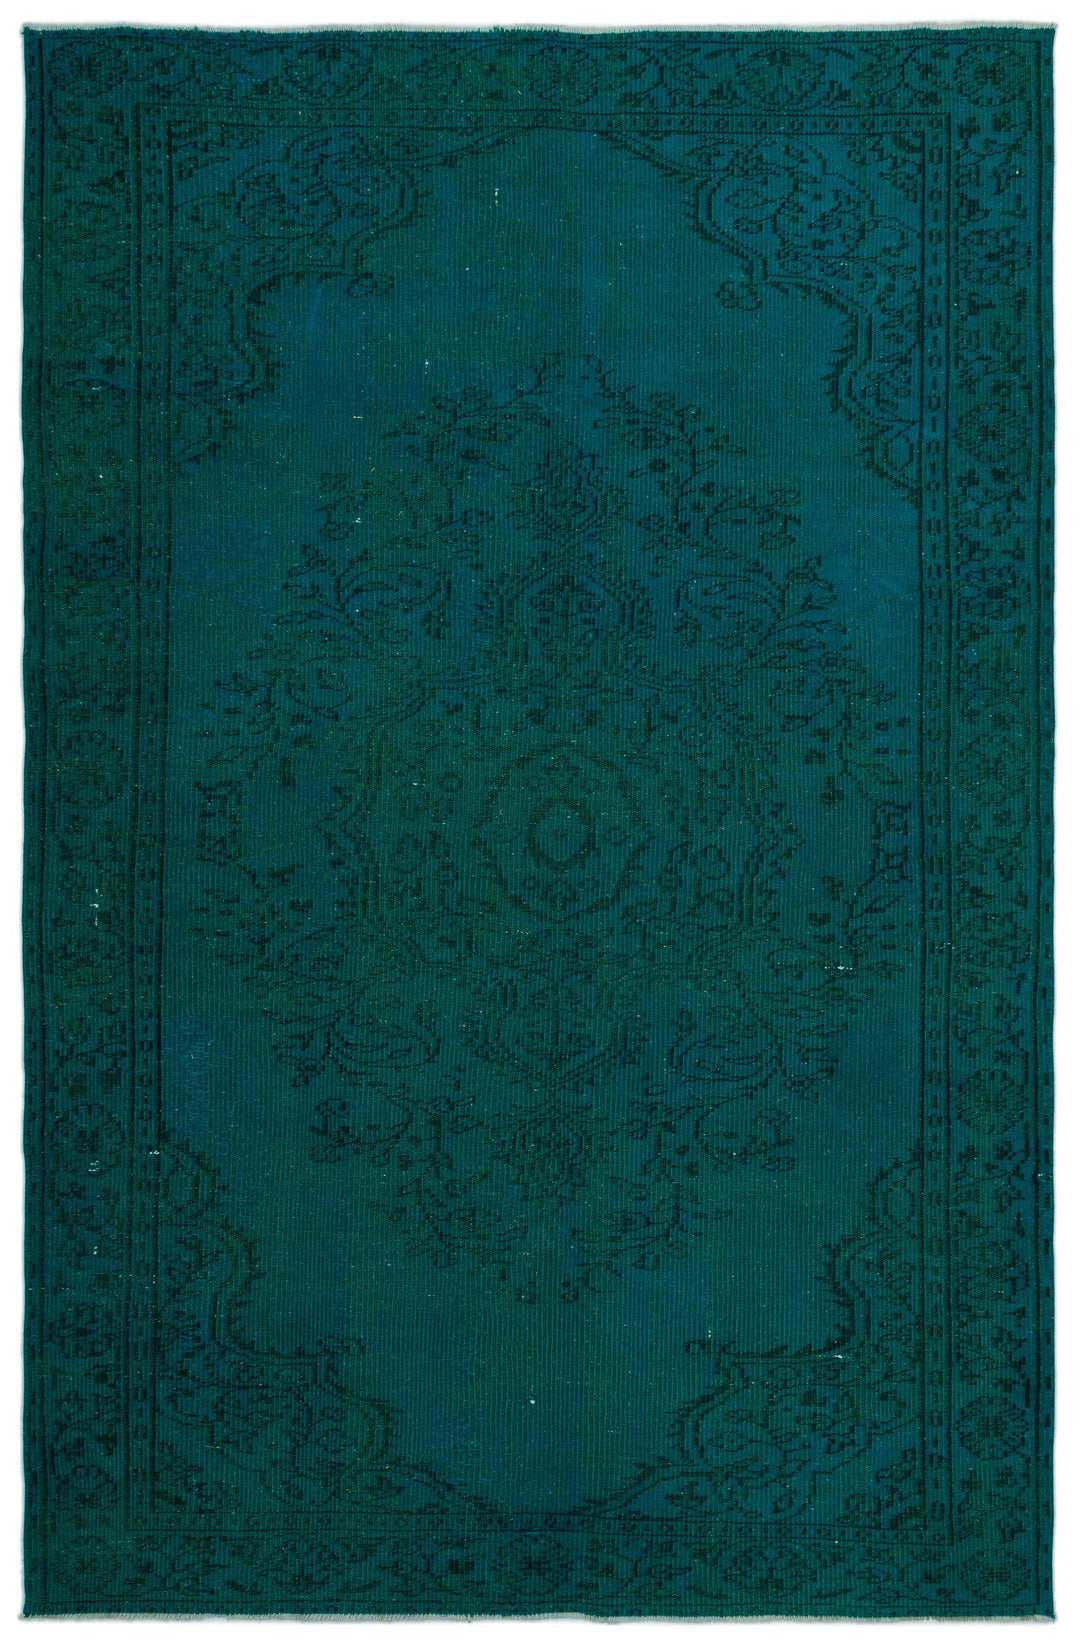 Athens Turquoise Tumbled Wool Hand Woven Carpet 164 x 259